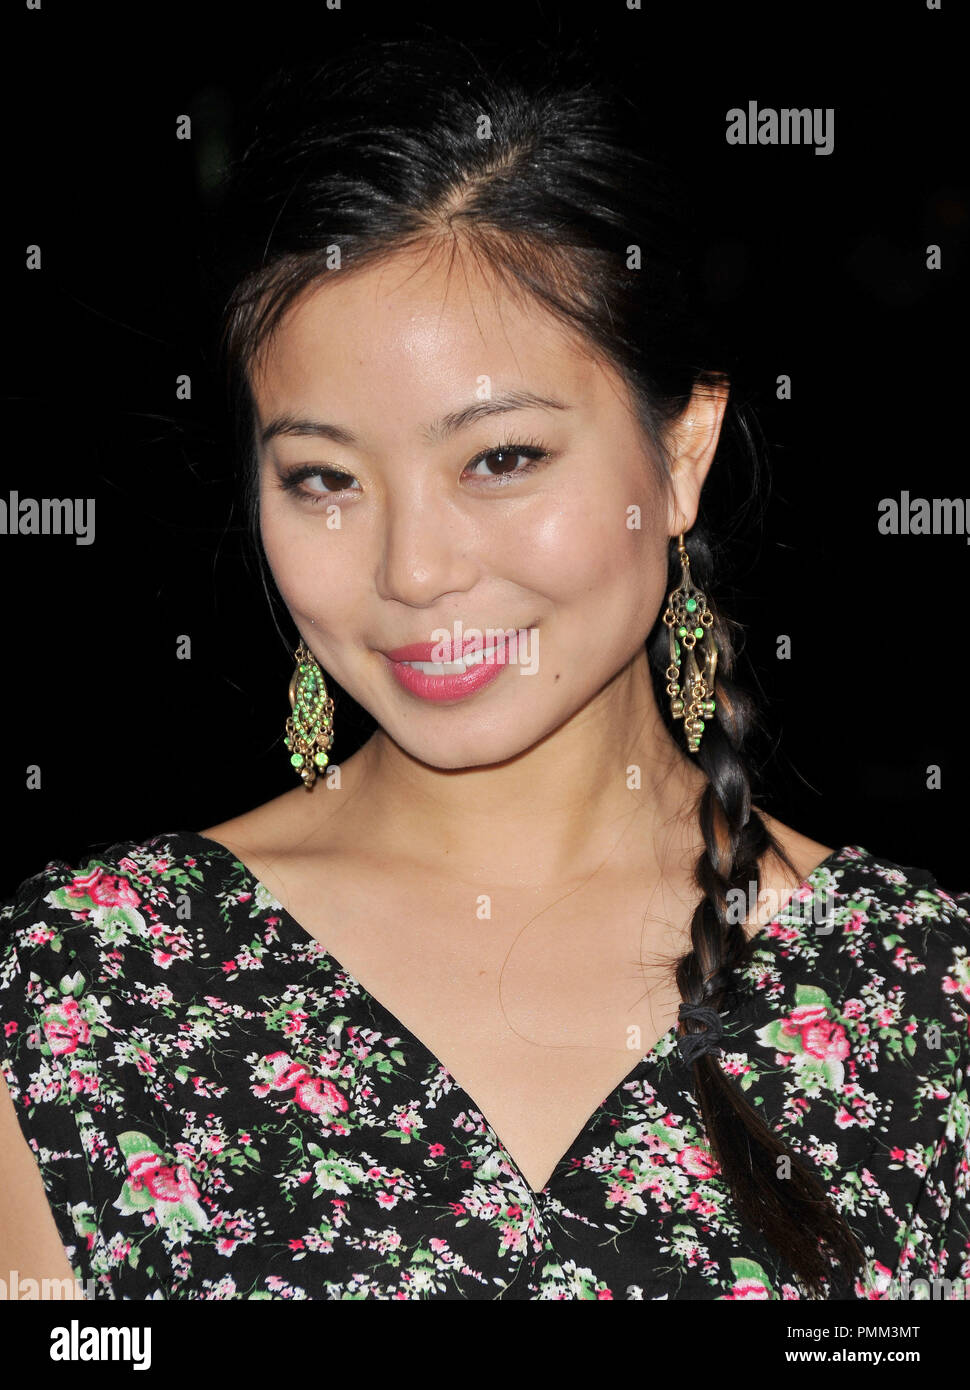 Michelle Ang at the Los Angeles Premiere of 'Big Mommas Like Father, Like Son' held at the Arclight Cinerama Dome in Hollywood, CA. The event took place on Thursday, February 10, 2011. Photo by PRPP Pacific Rim Photo Press / PictureLux Stock Photo